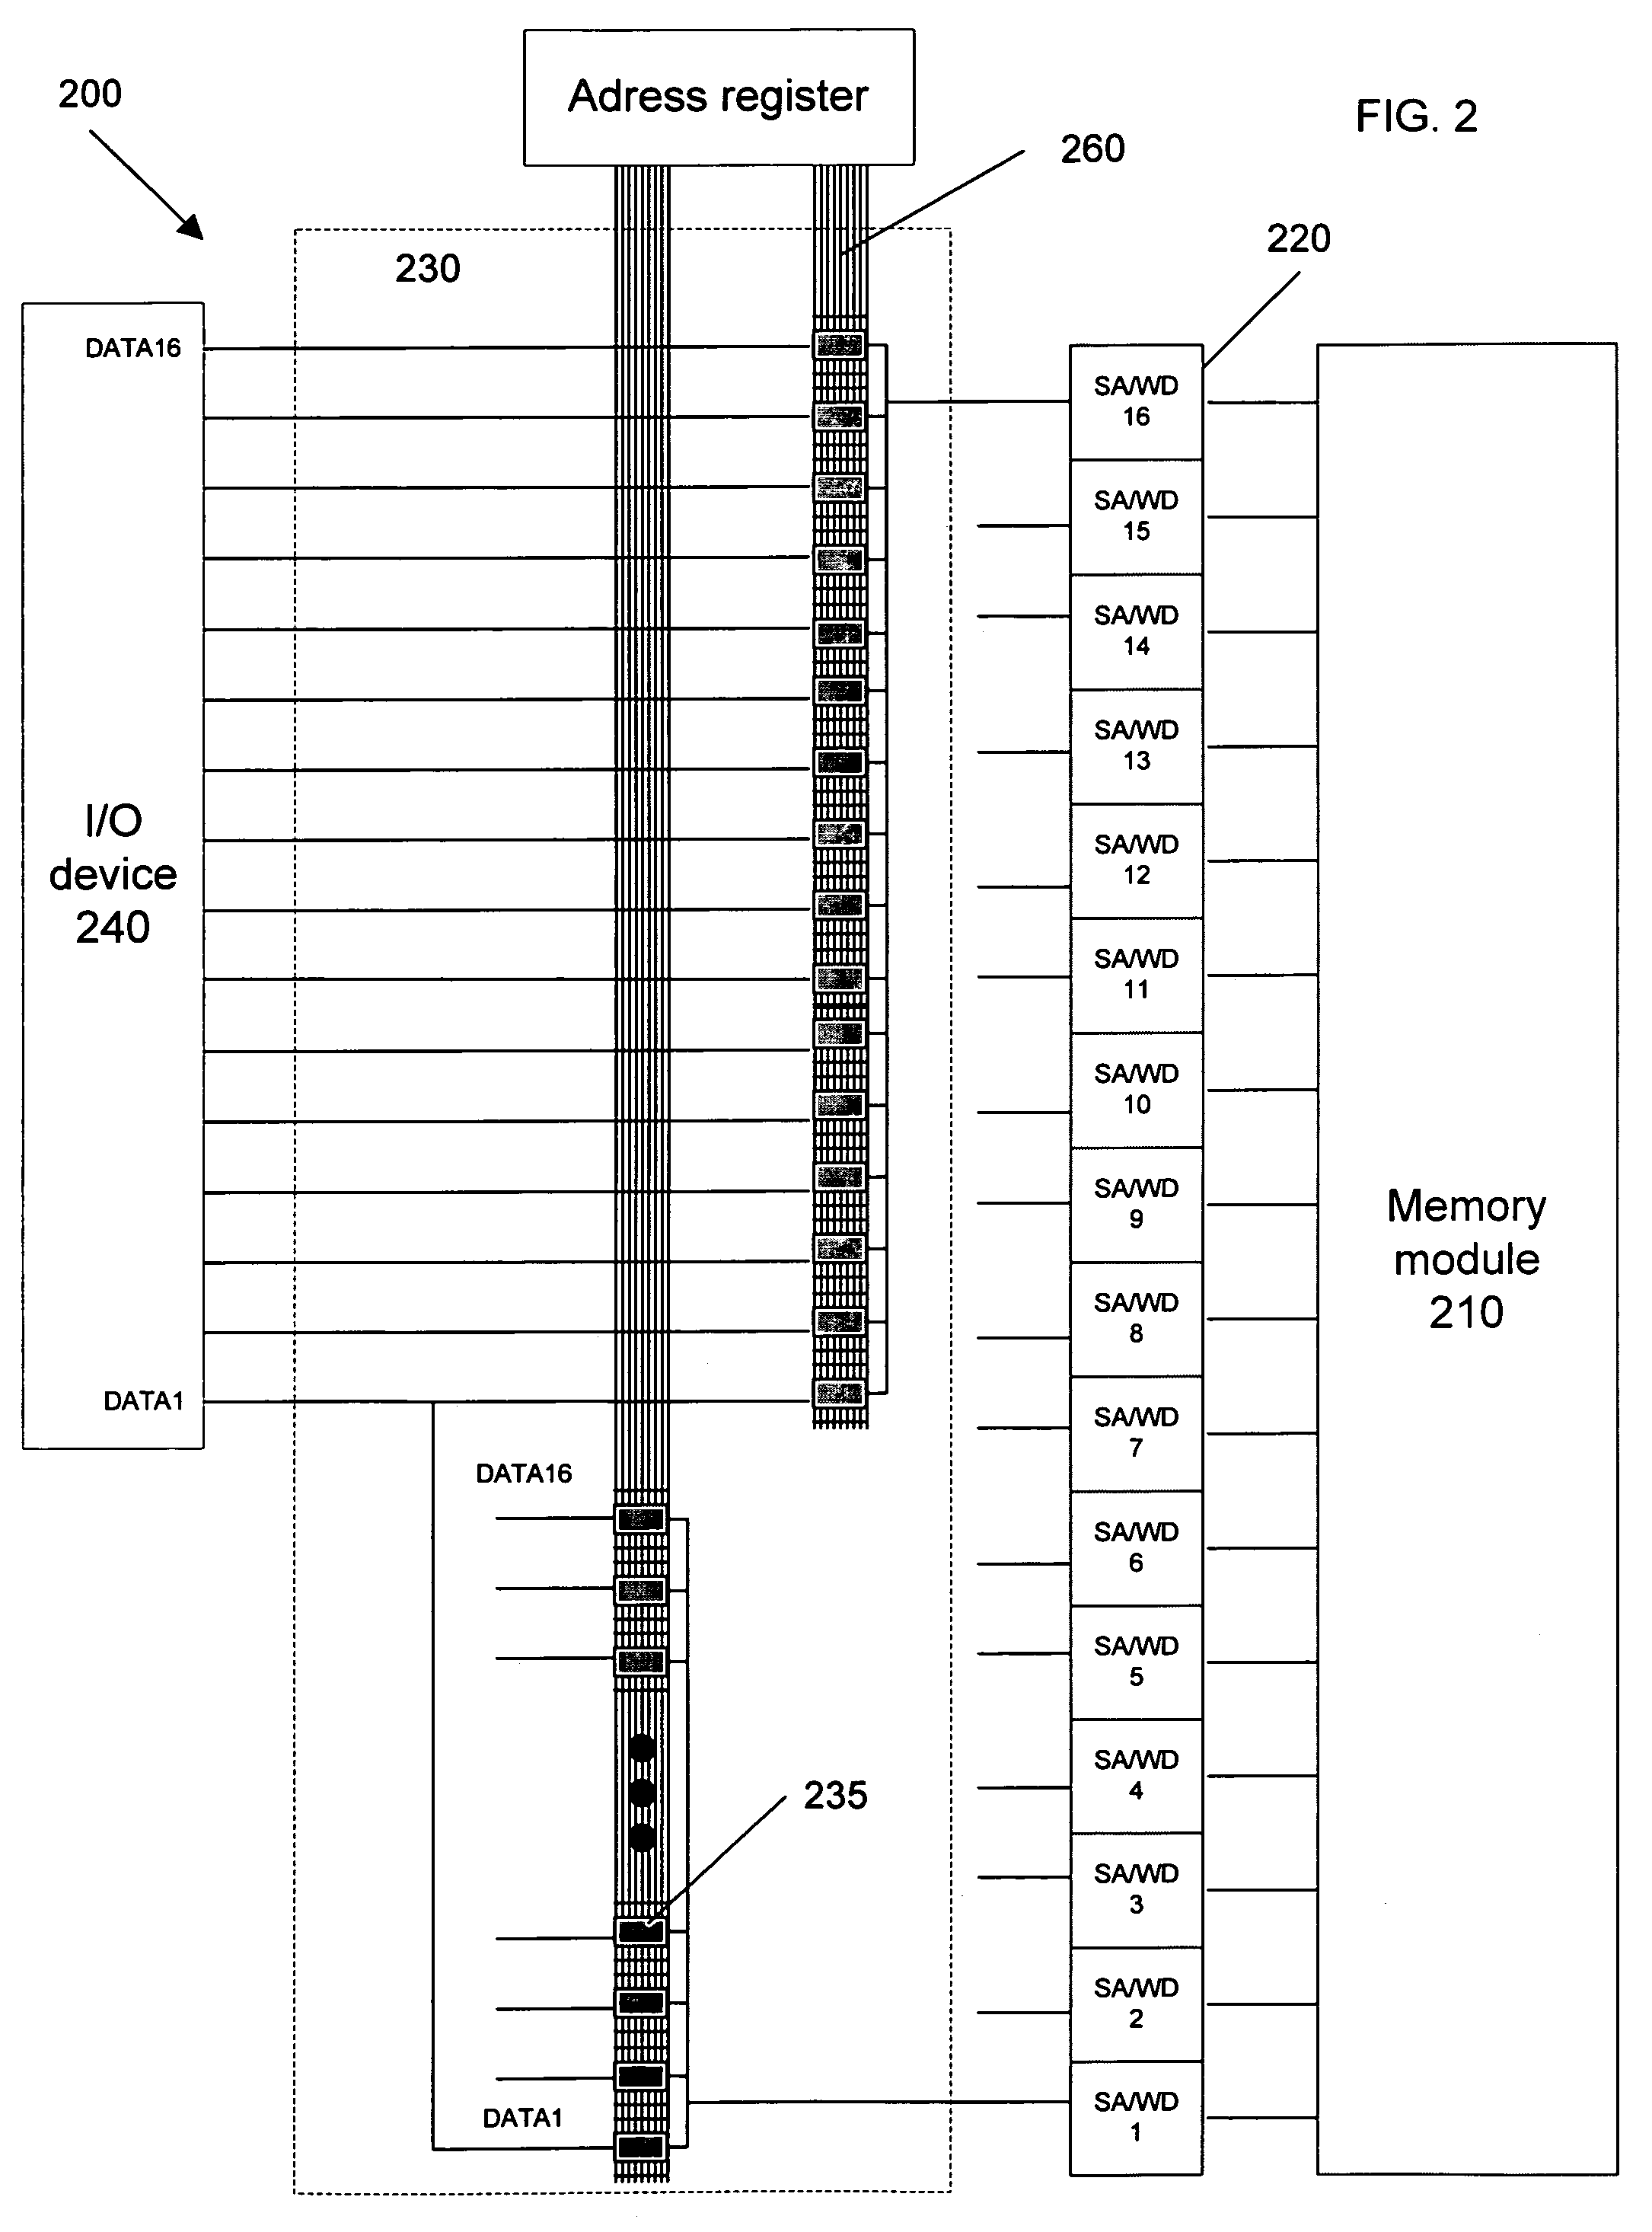 FPGA equivalent input and output grid muxing on structural ASIC memory